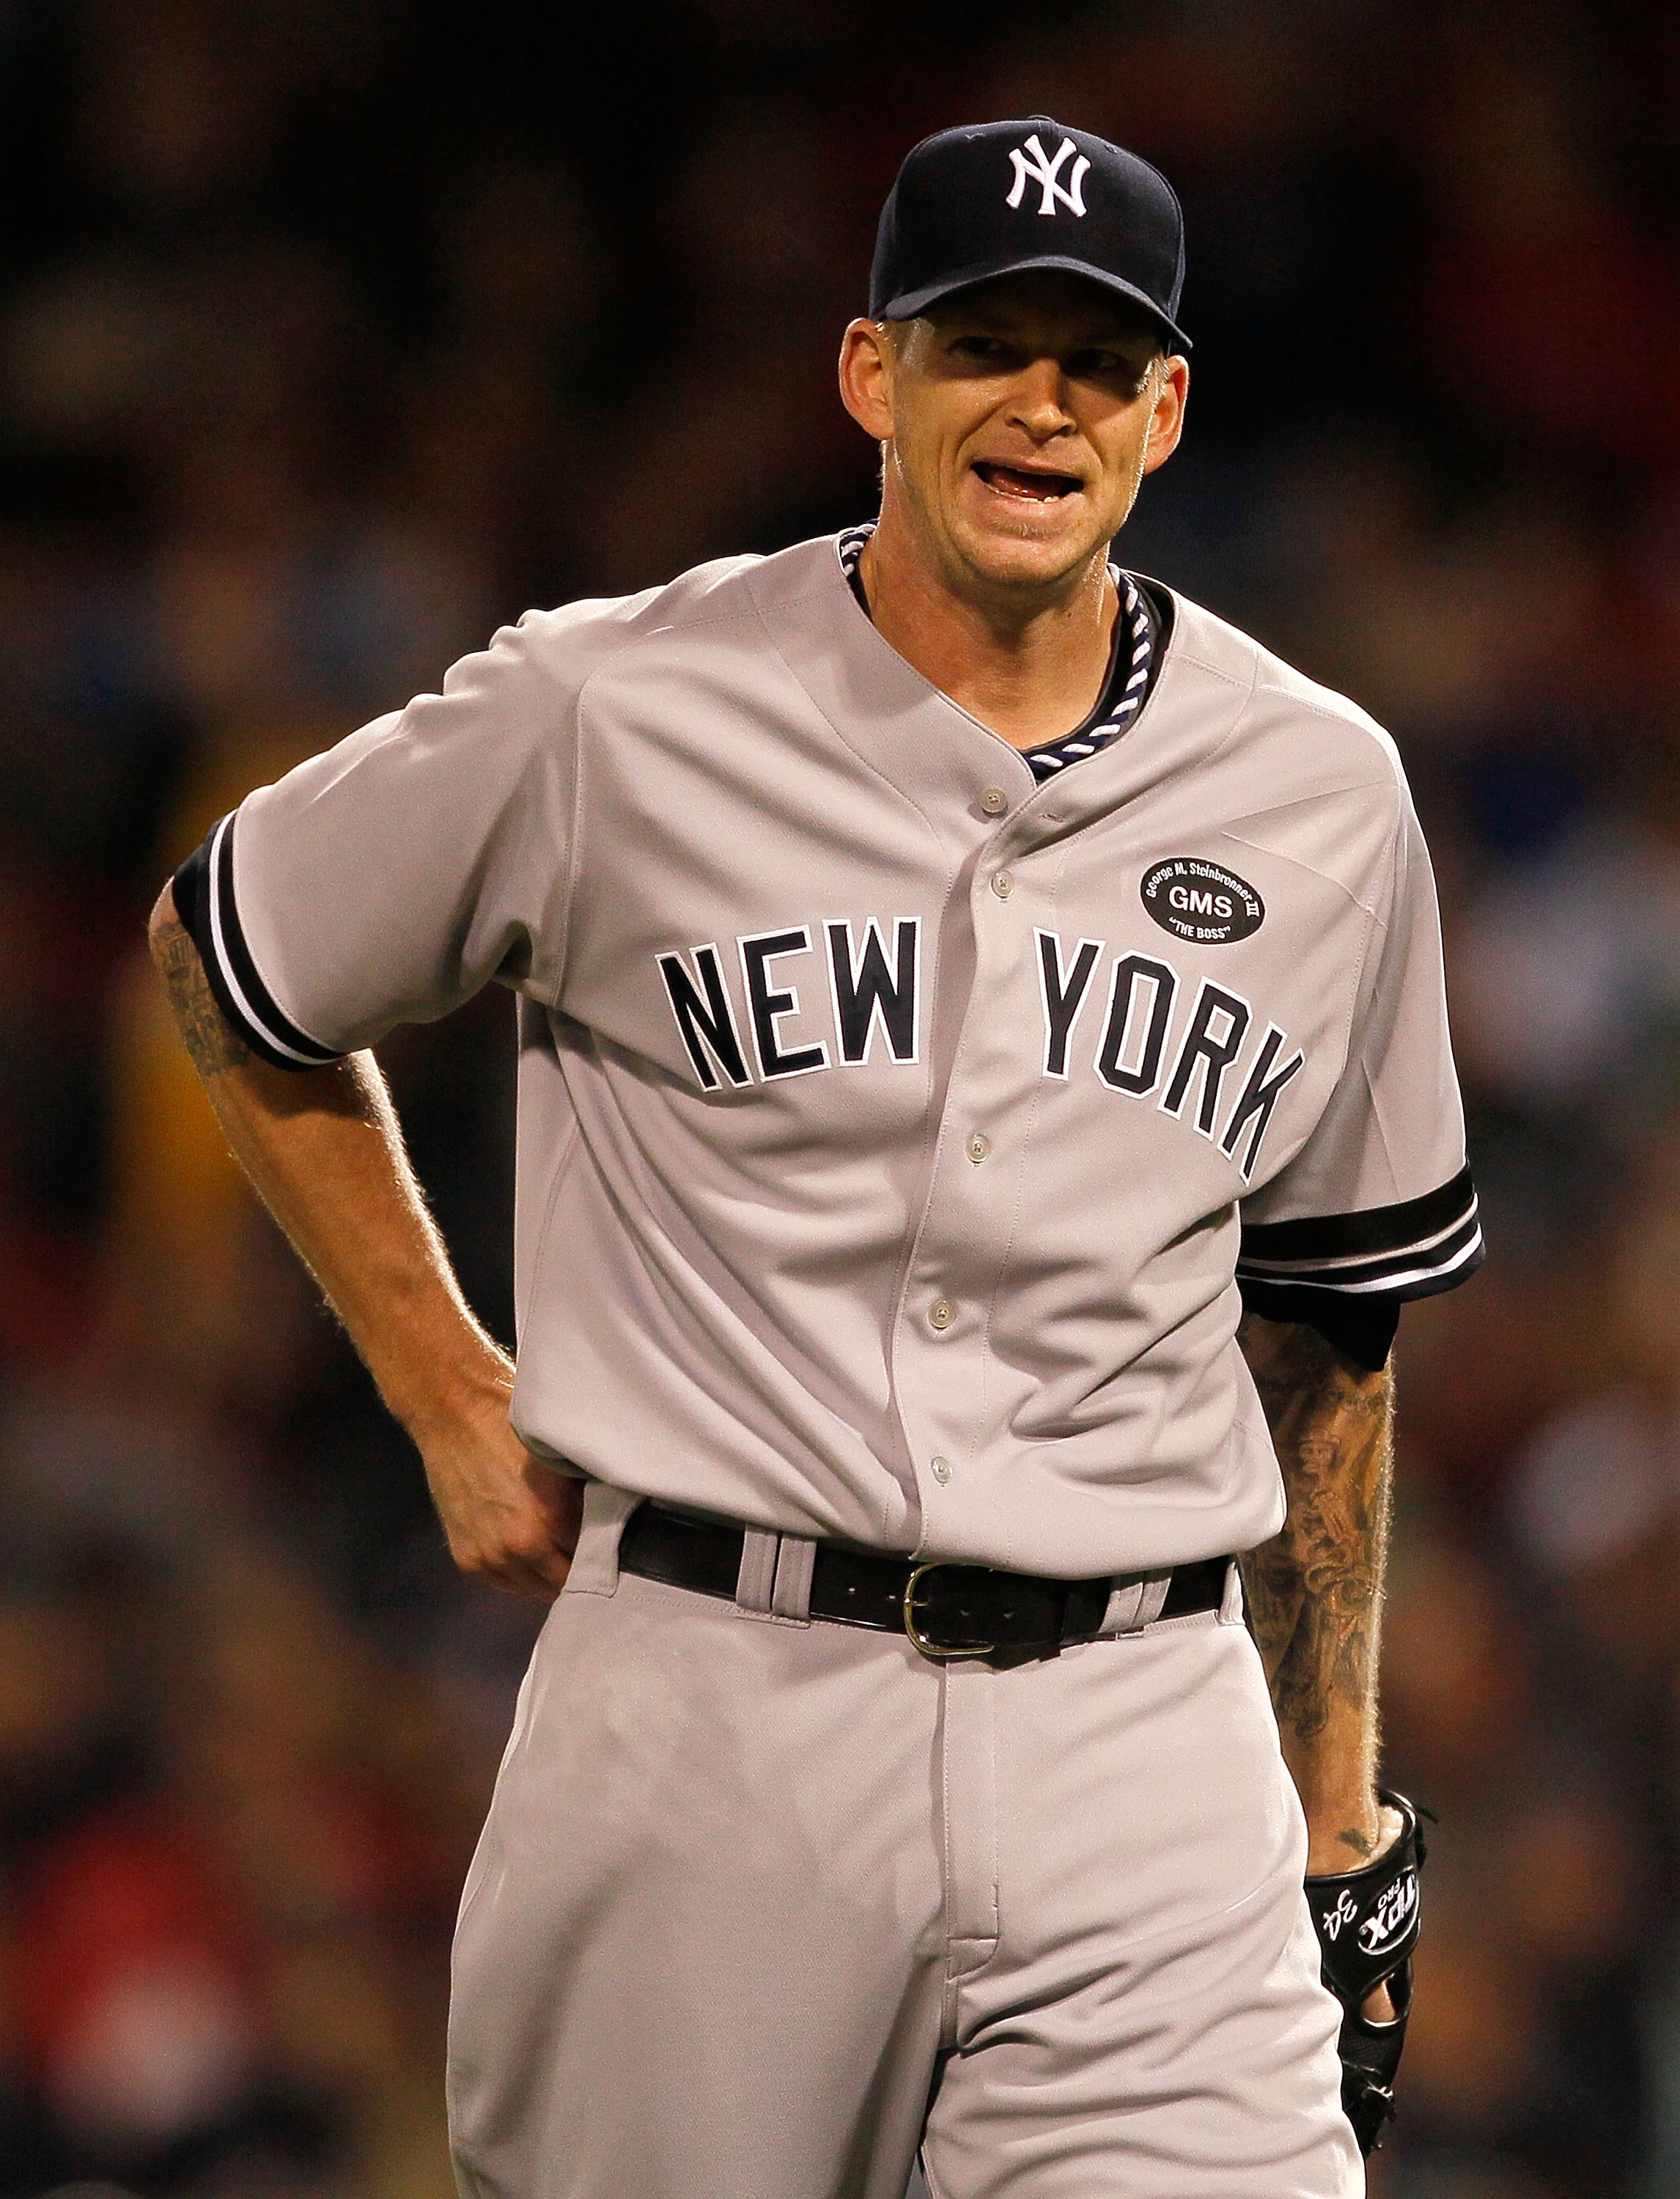 BOSTON - OCTOBER 2:  A.J. Burnett #34 of the New York Yankees reacts against the Boston Red Sox in the second game of a doubleheader at Fenway Park, October 2, 2010, in Boston, Massachusetts. (Photo by Jim Rogash/Getty Images)